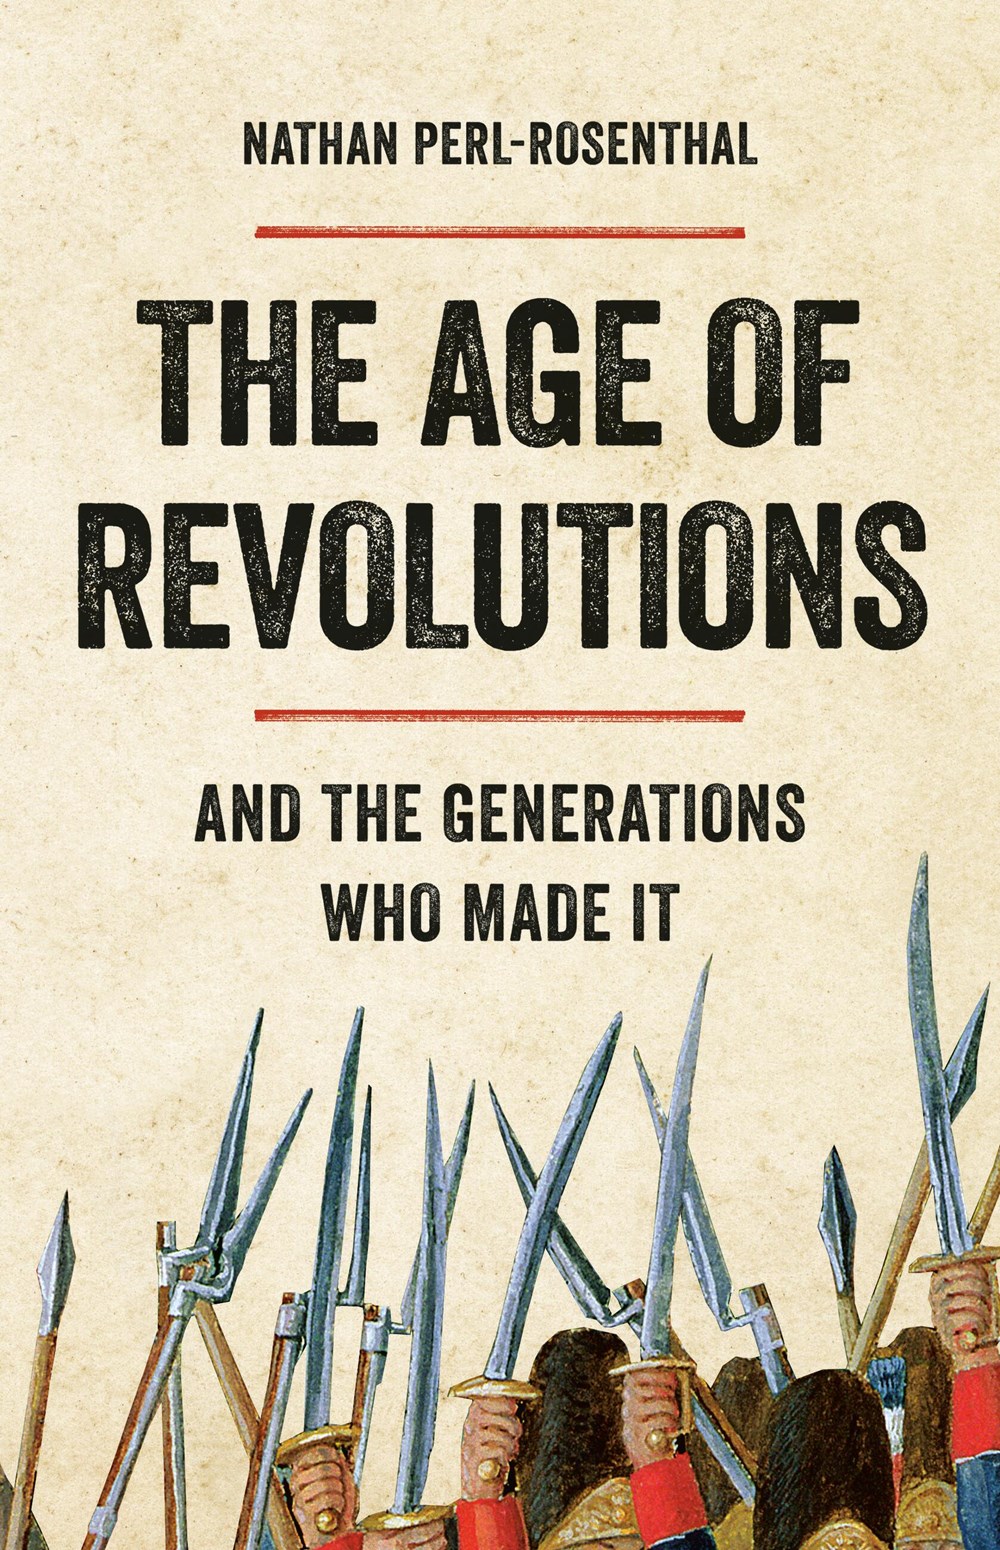 The Age of Revolutions: And the Generations Who Made It